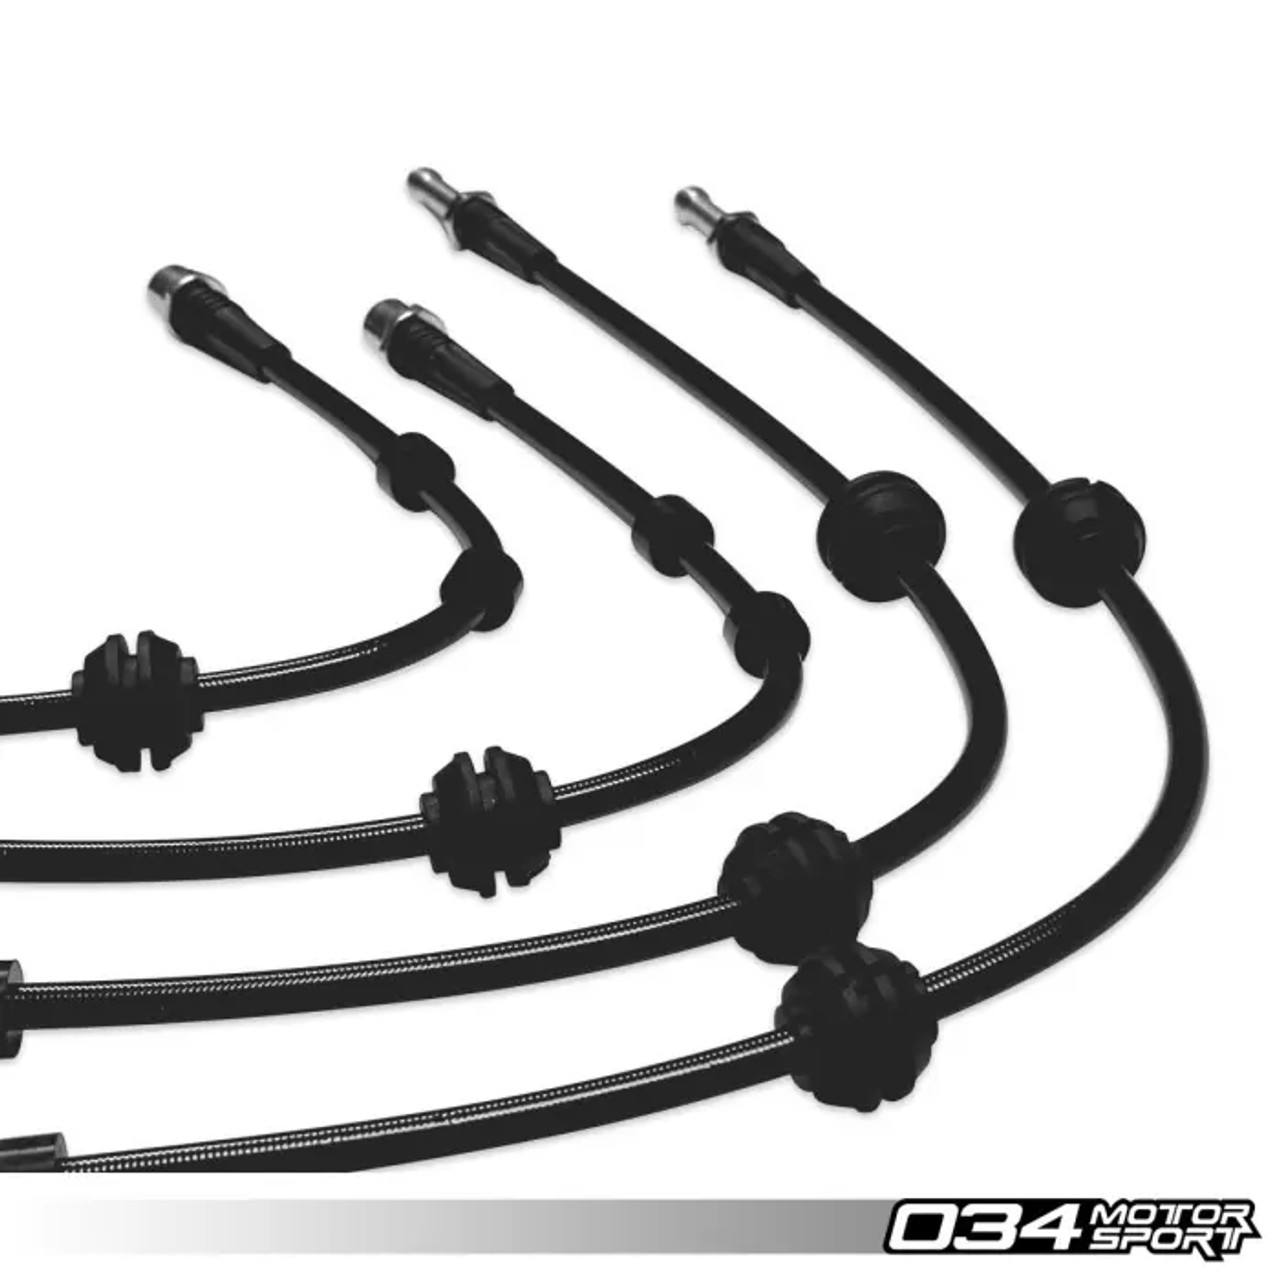 034Motorsport Stainless Steel Braided Brake Line Set for C7 & C7.5 A6, A7, S6 & S7